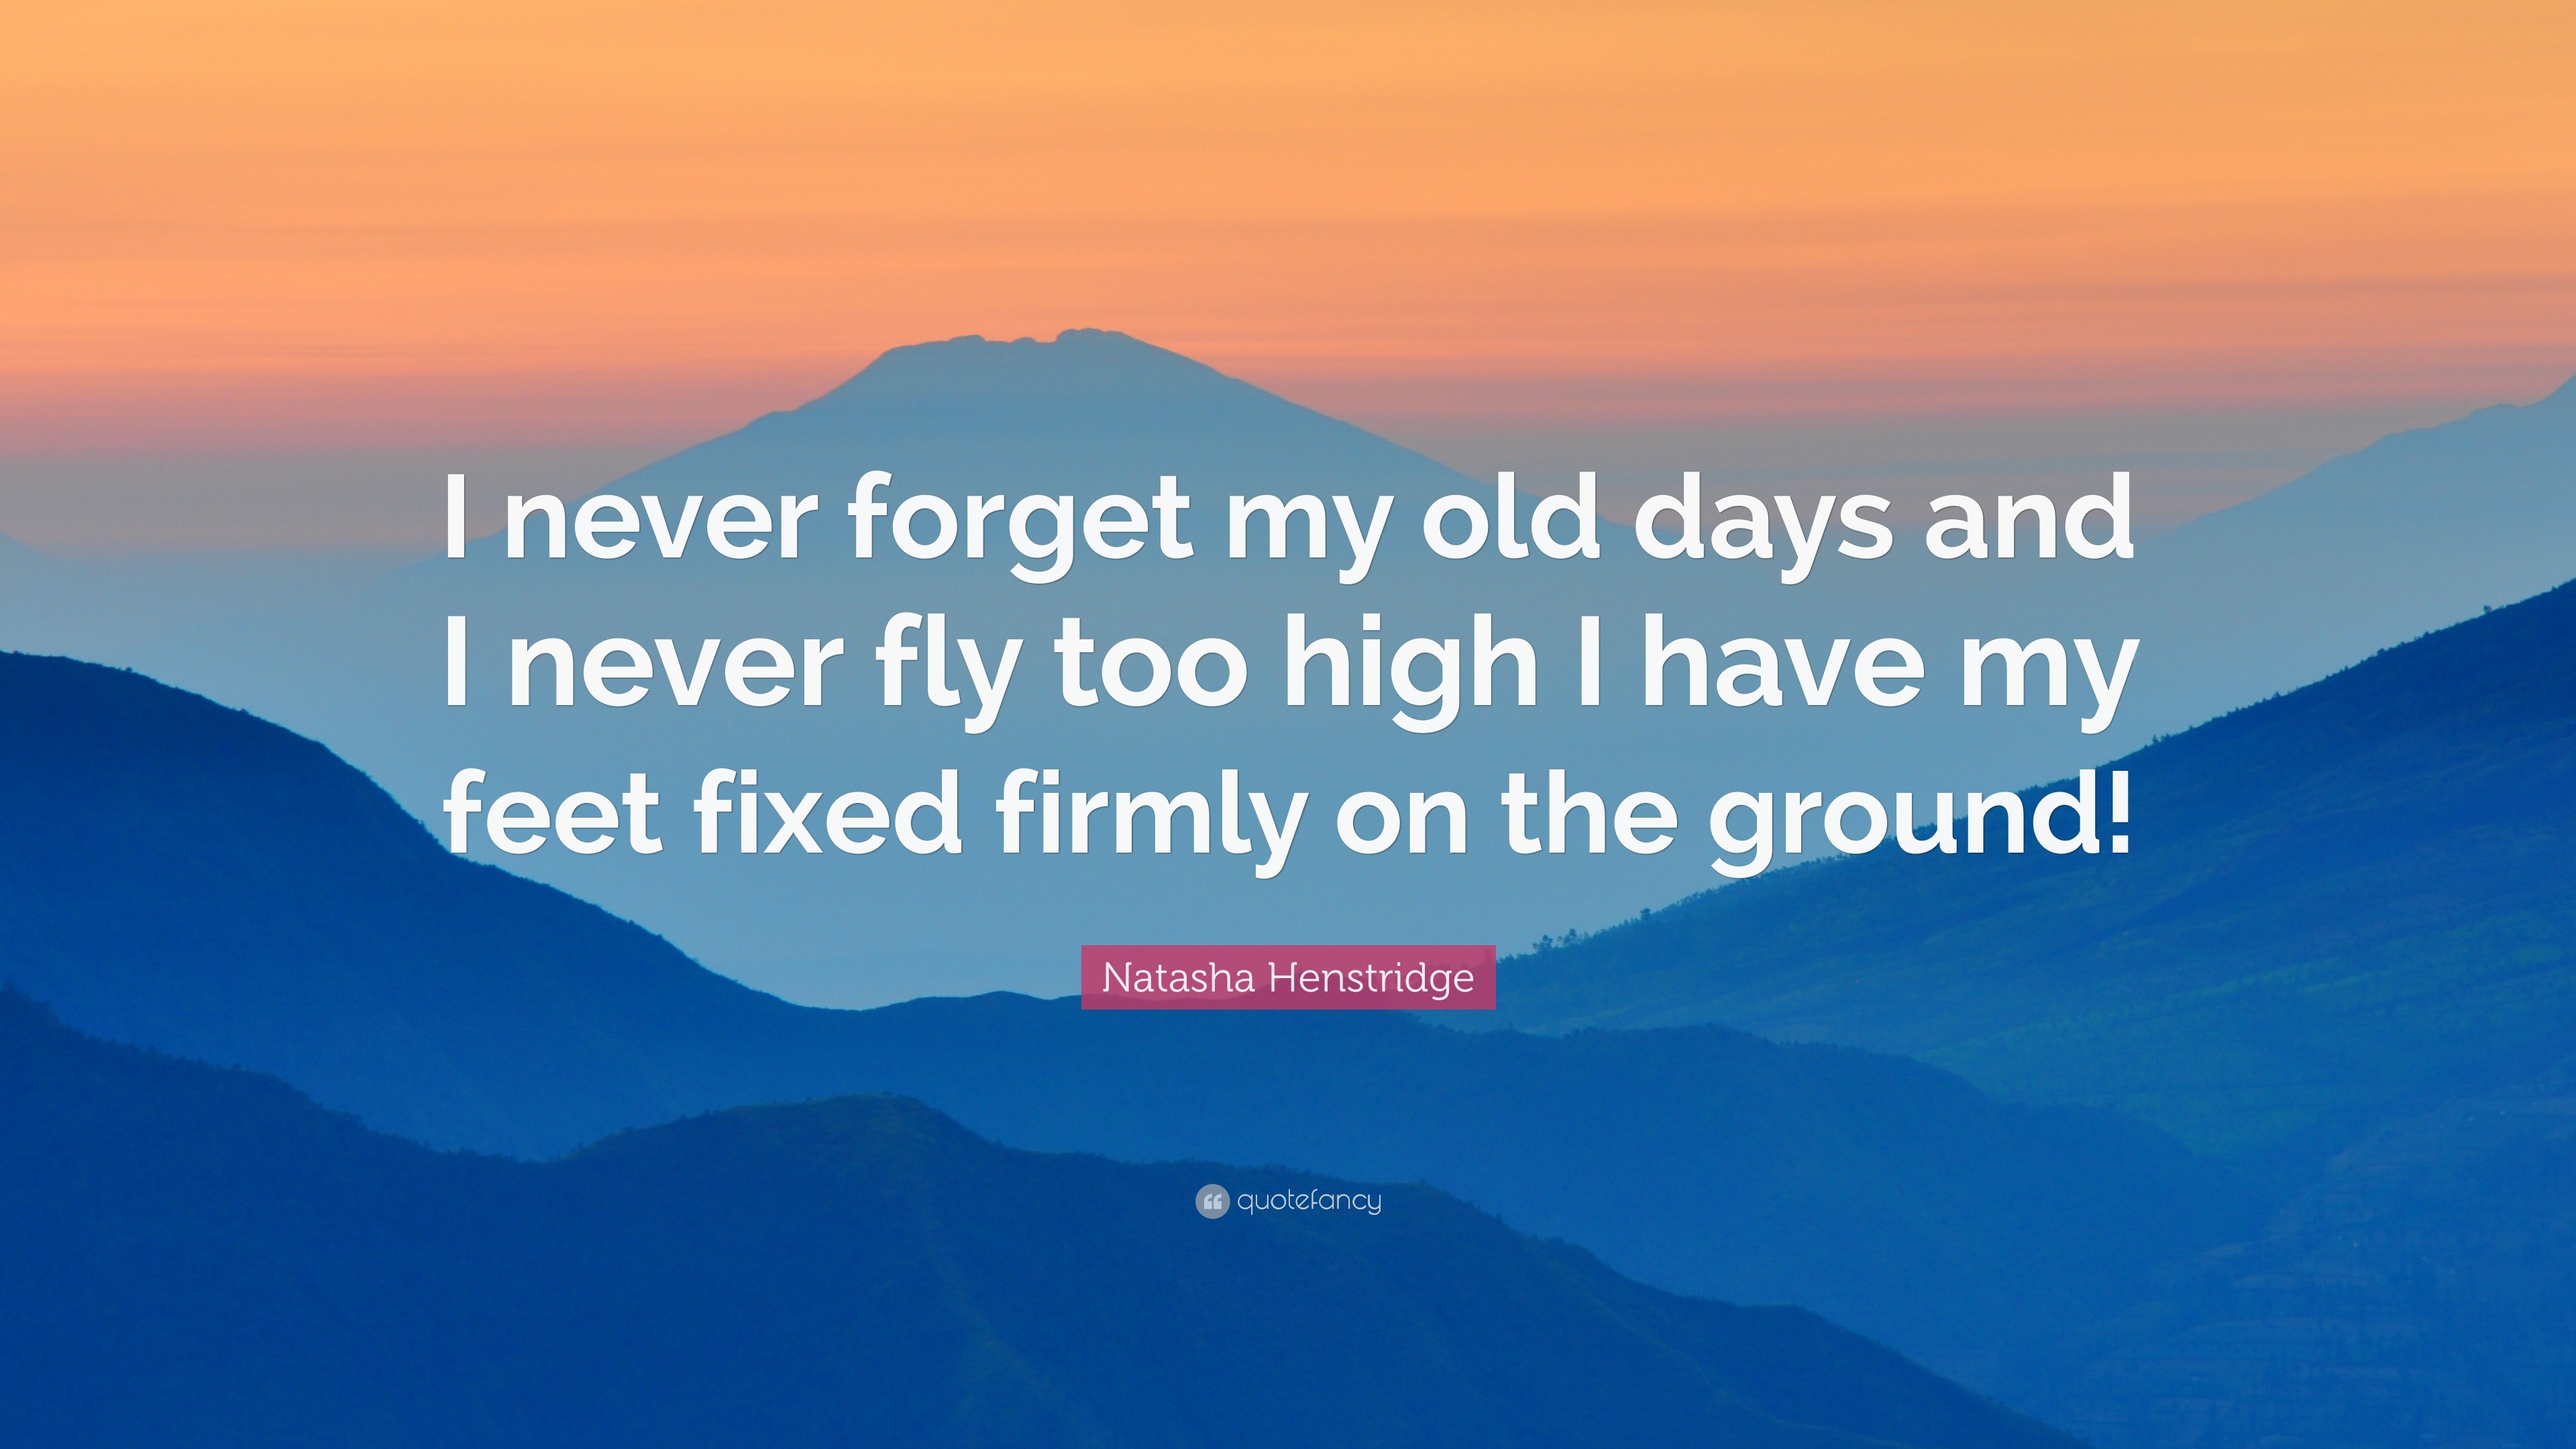 Natasha Henstridge Quote: “I never forget my old days and I never fly too  high I